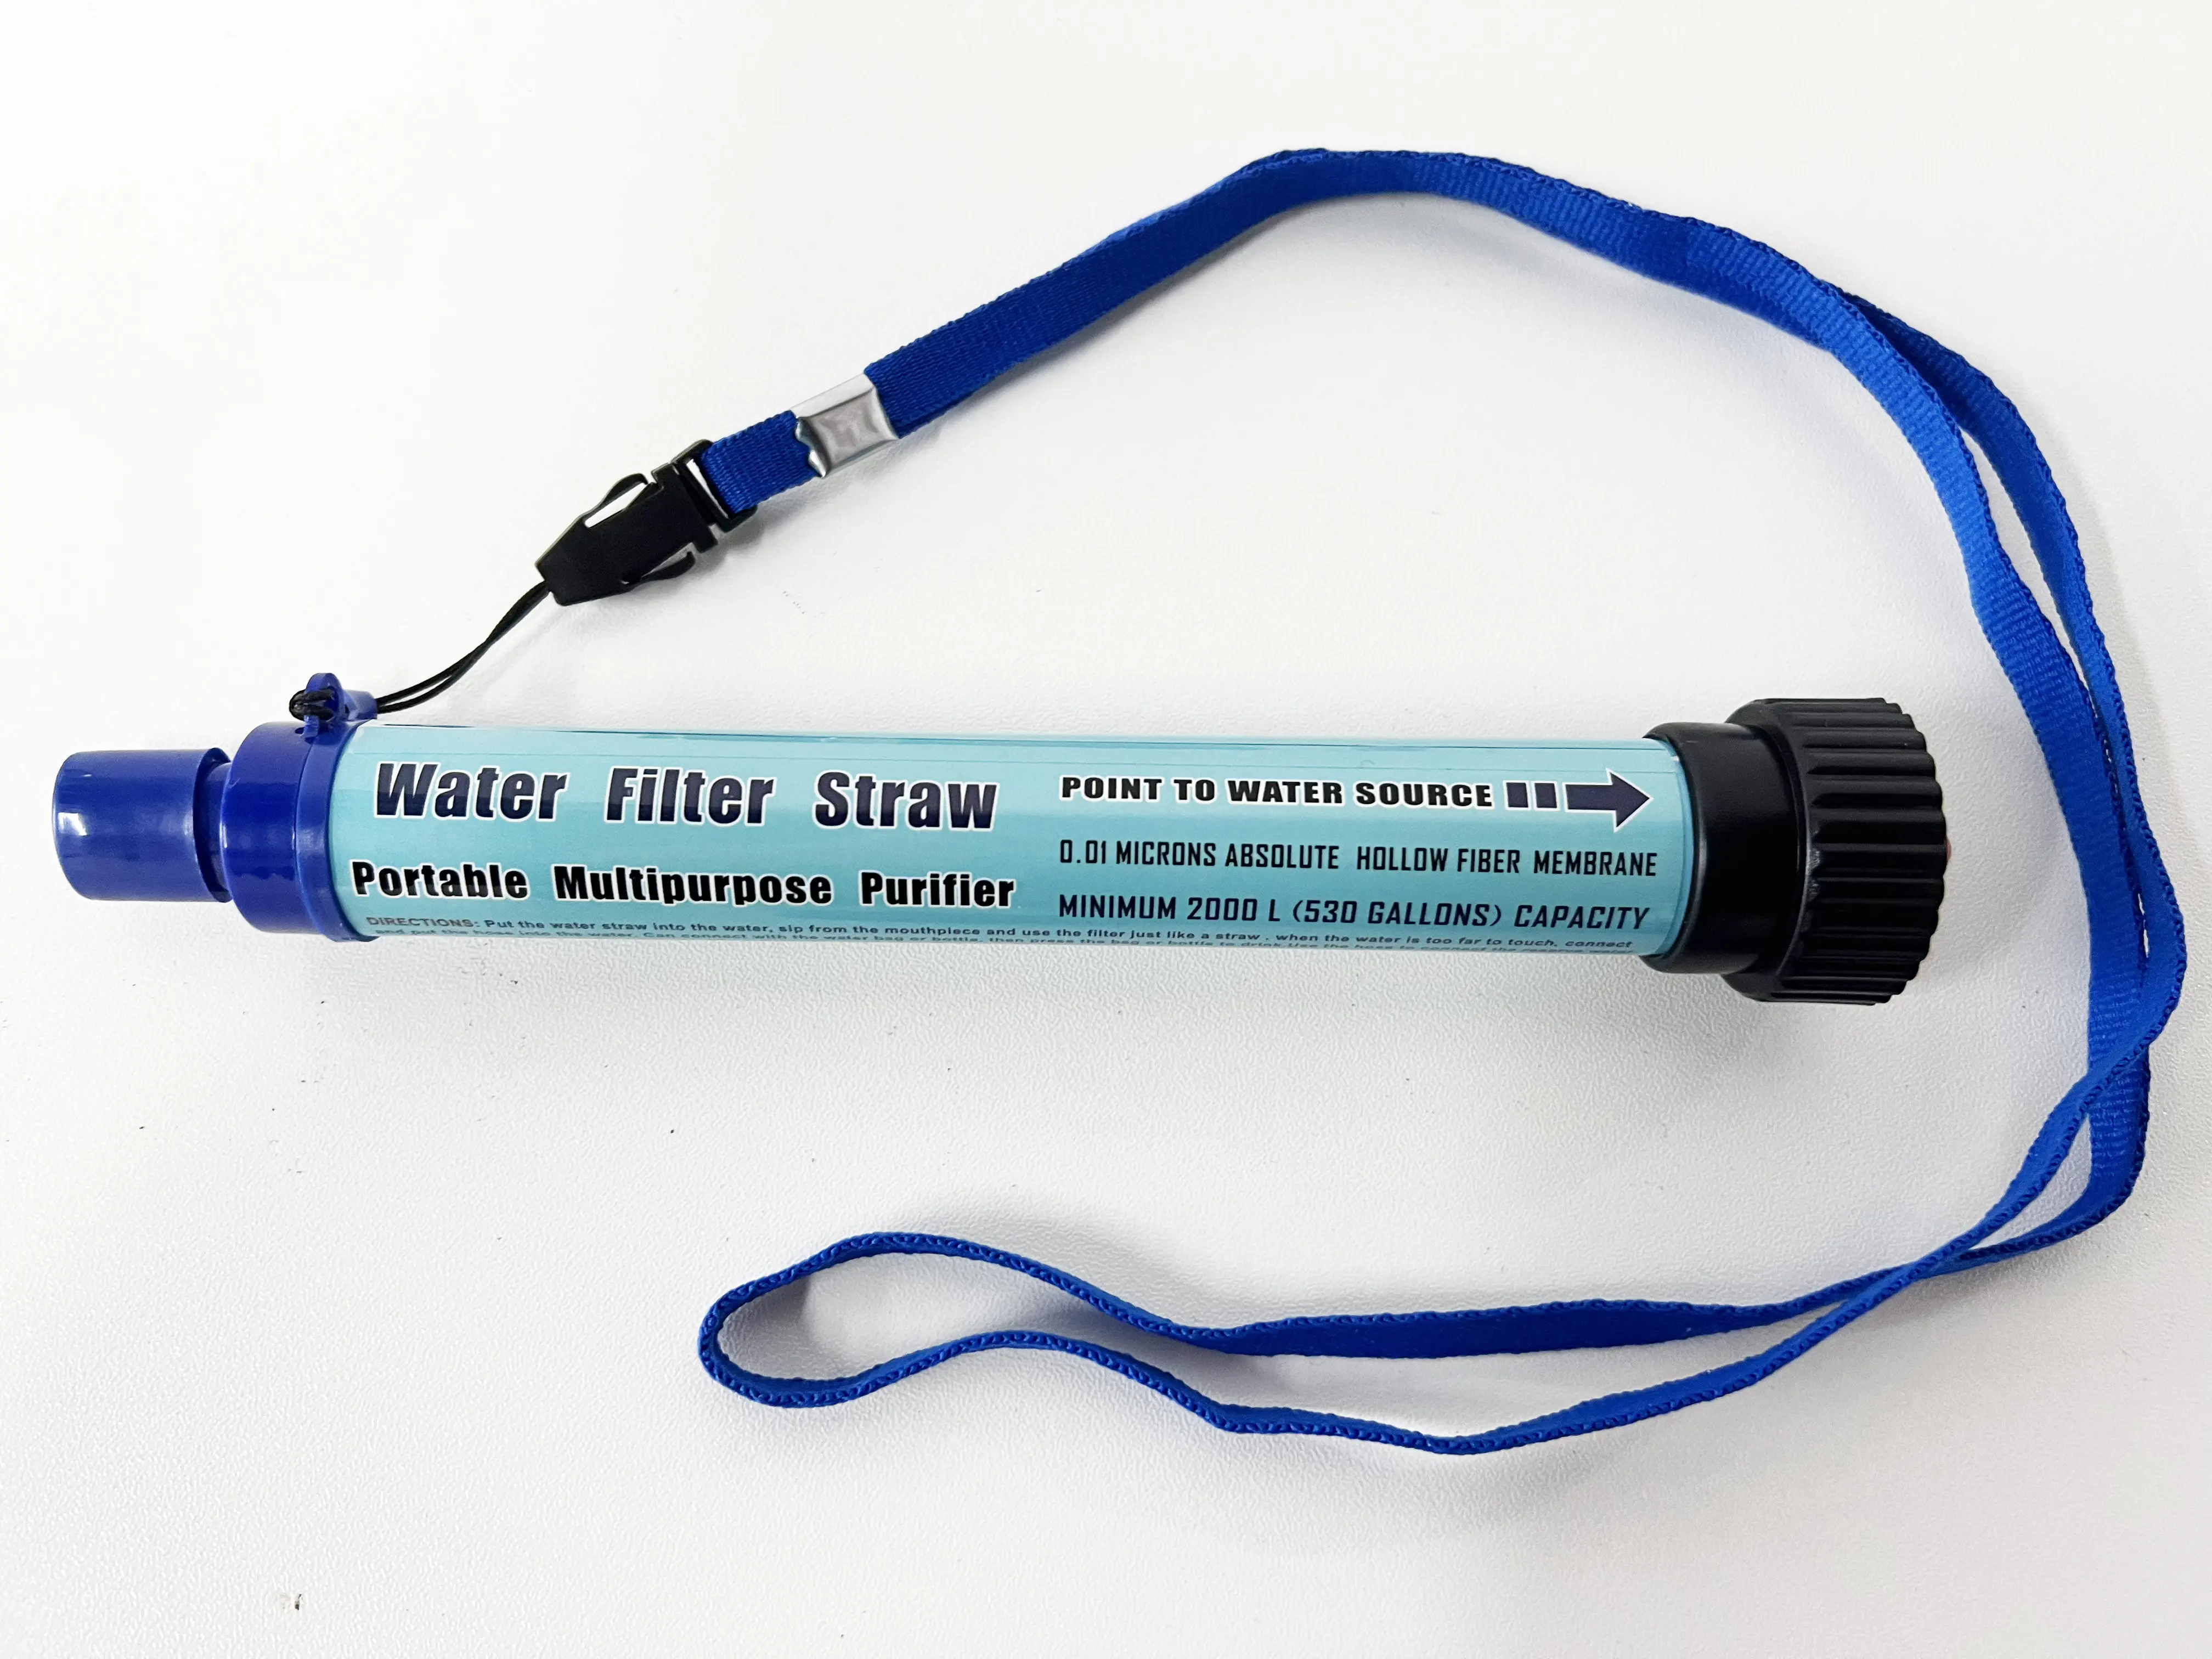 Personal Straw Survival Filtration Portable Camping Gear Emergency Preparedness Camper's Water Filter